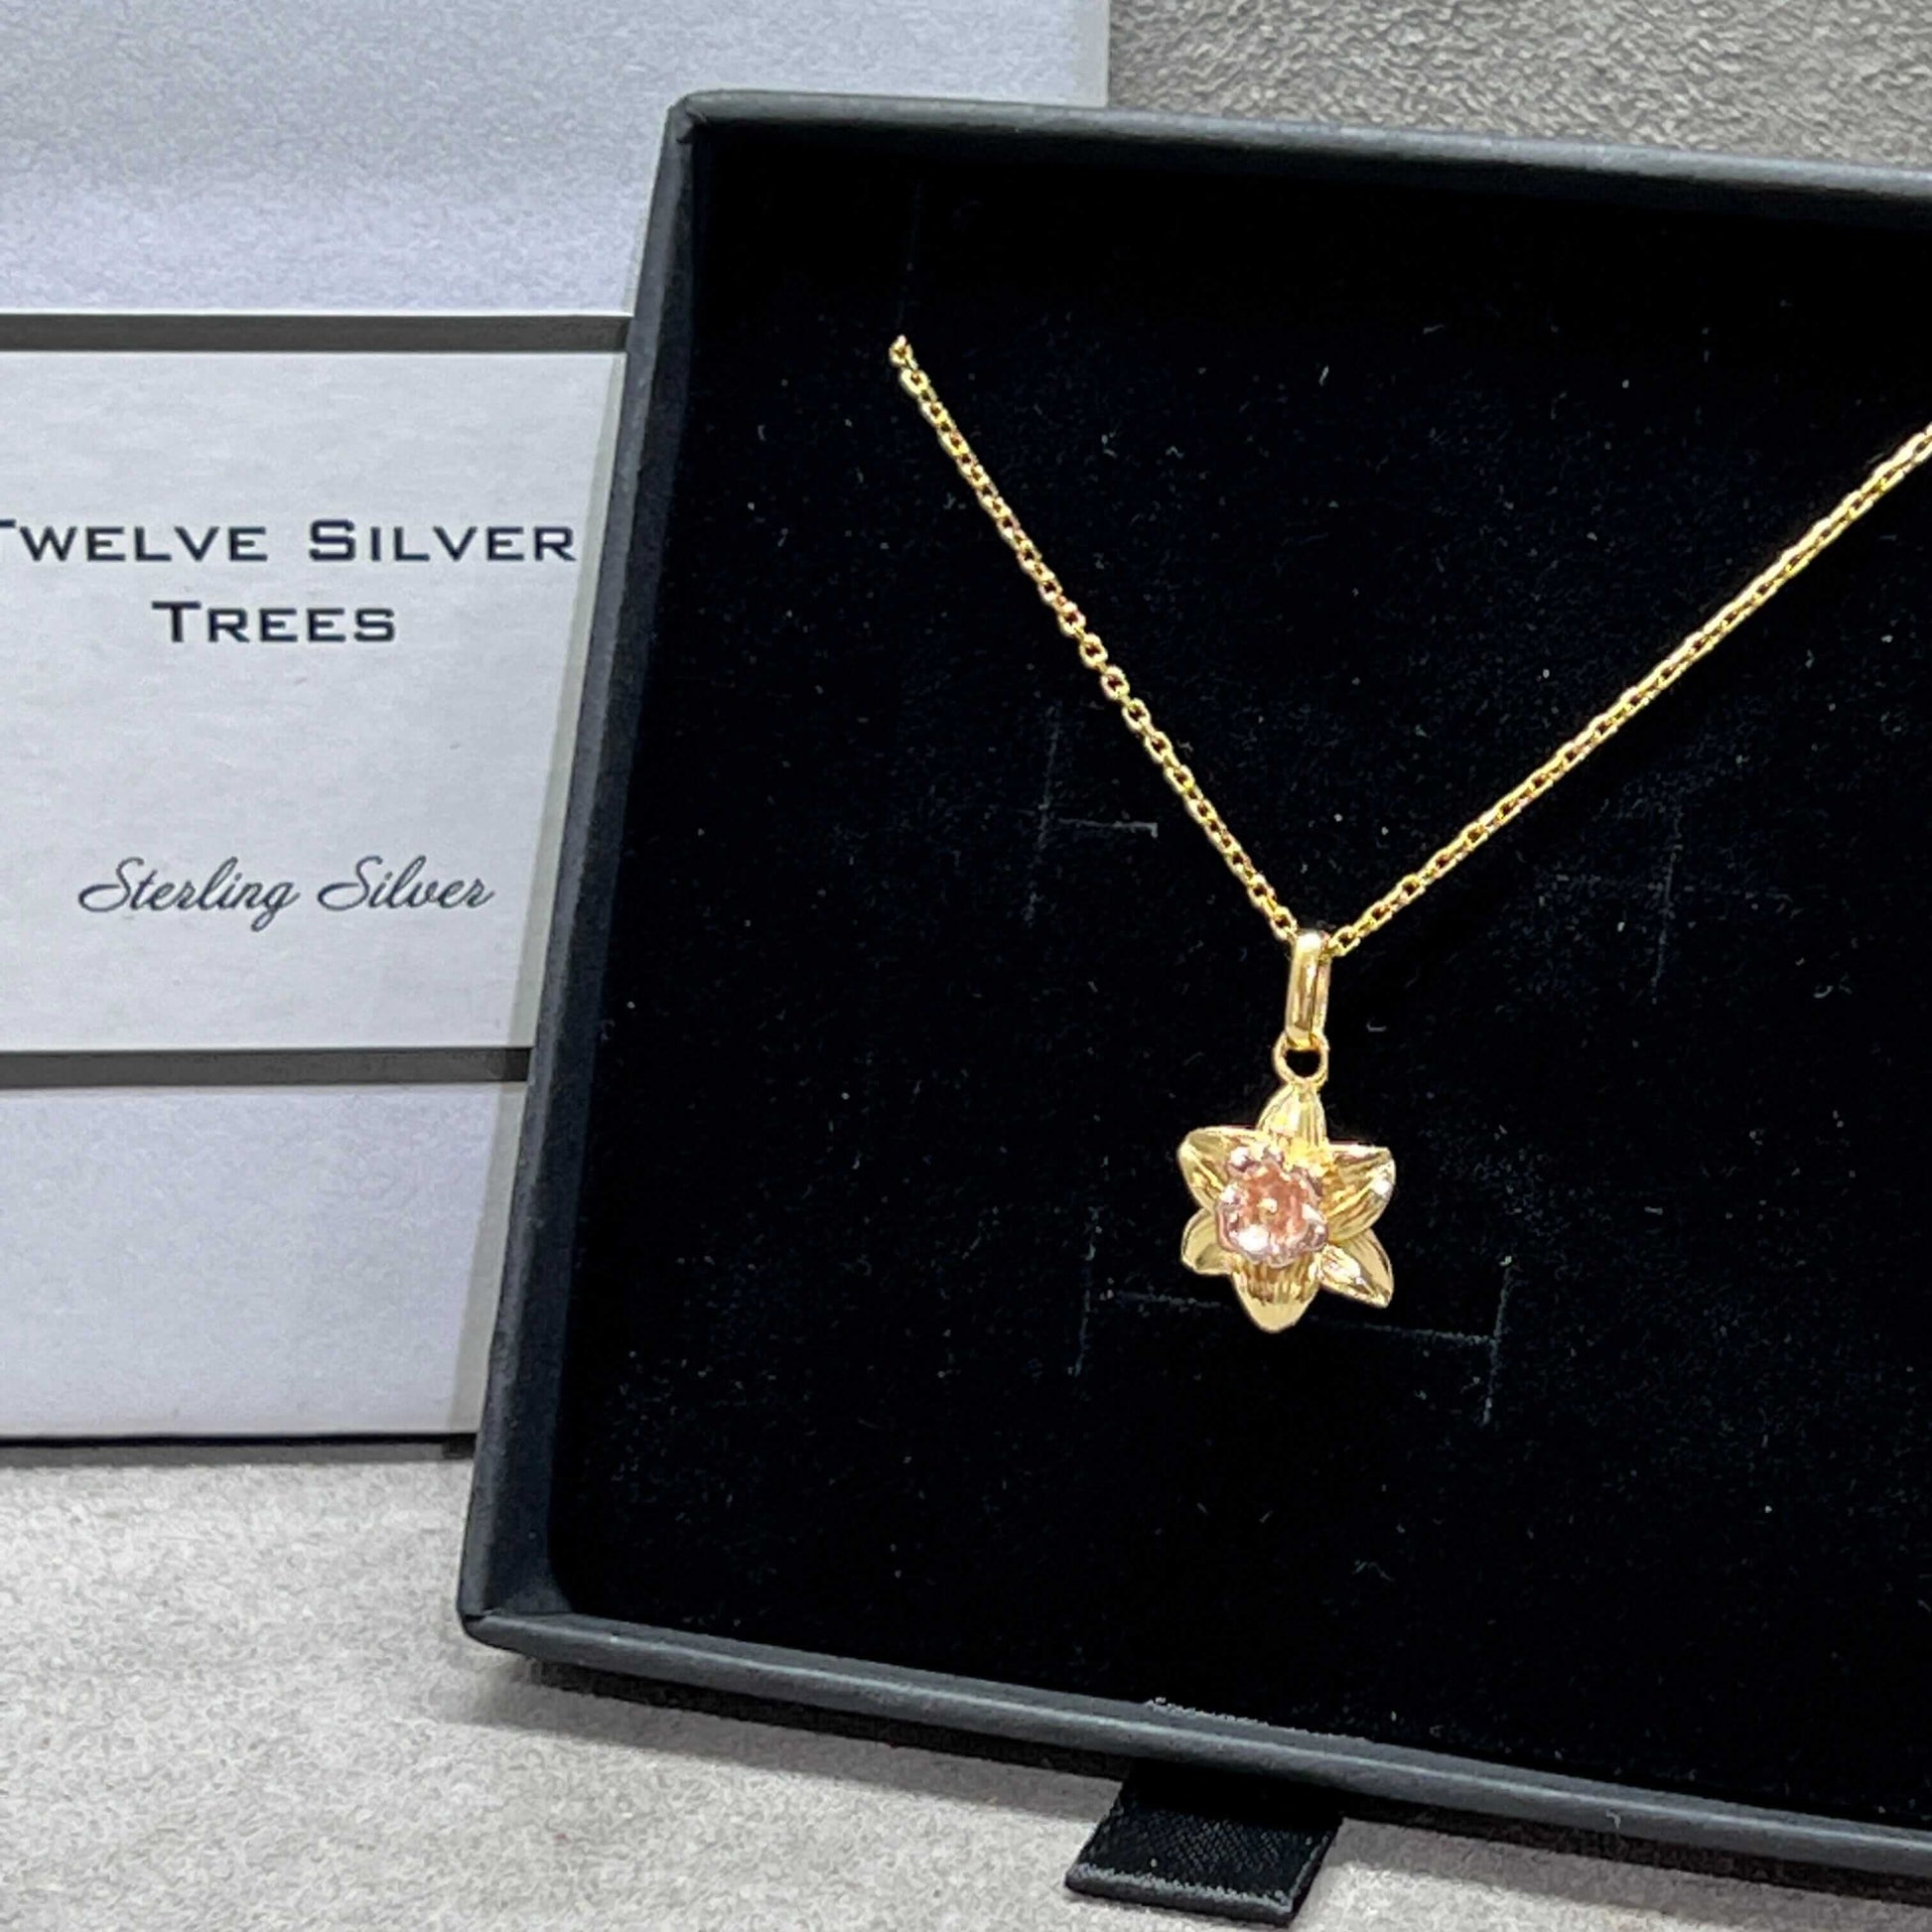 2 Tone Daffodil Charm Pendant In Sterling Silver & 18 Carat Gold - March Birth Flower - Twelve Silver Trees